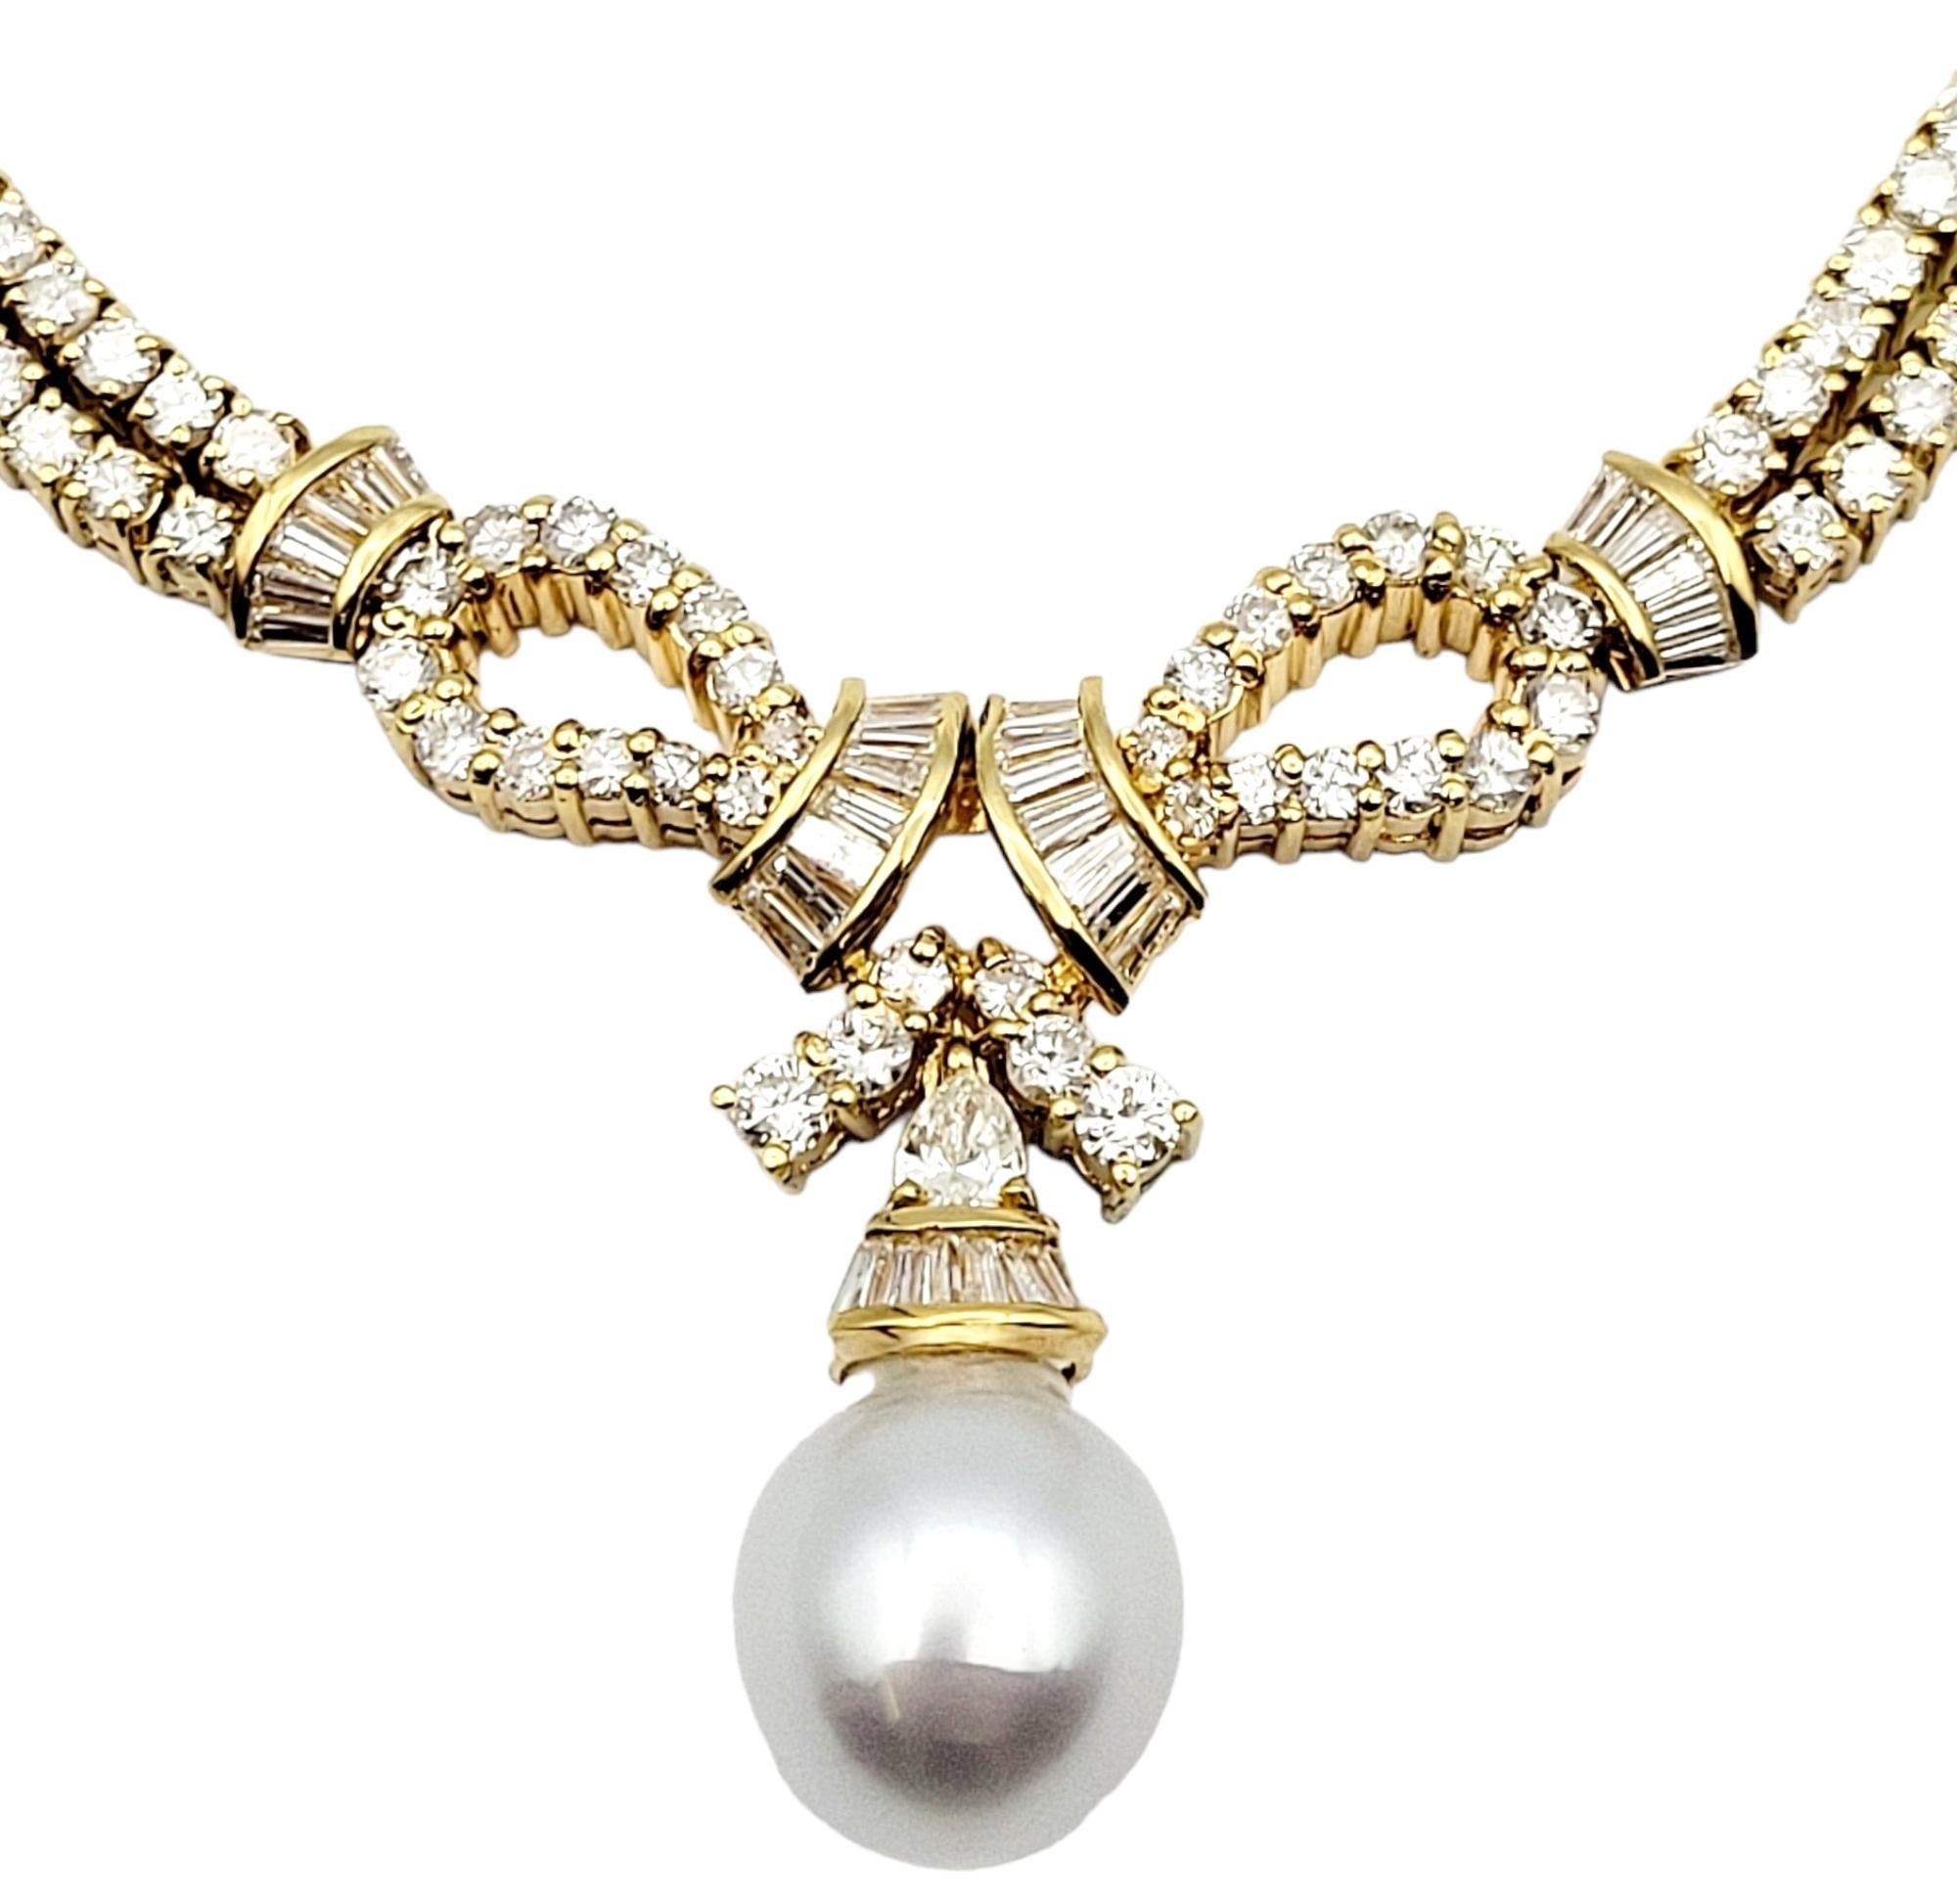 This breathtaking necklace of diamonds and a single baroque cultured pearl is a true embodiment of sophistication. With its undeniable sparkle and attractive modern design, this piece is sure to WOW. 

A captivating diamond y-drop design crafted